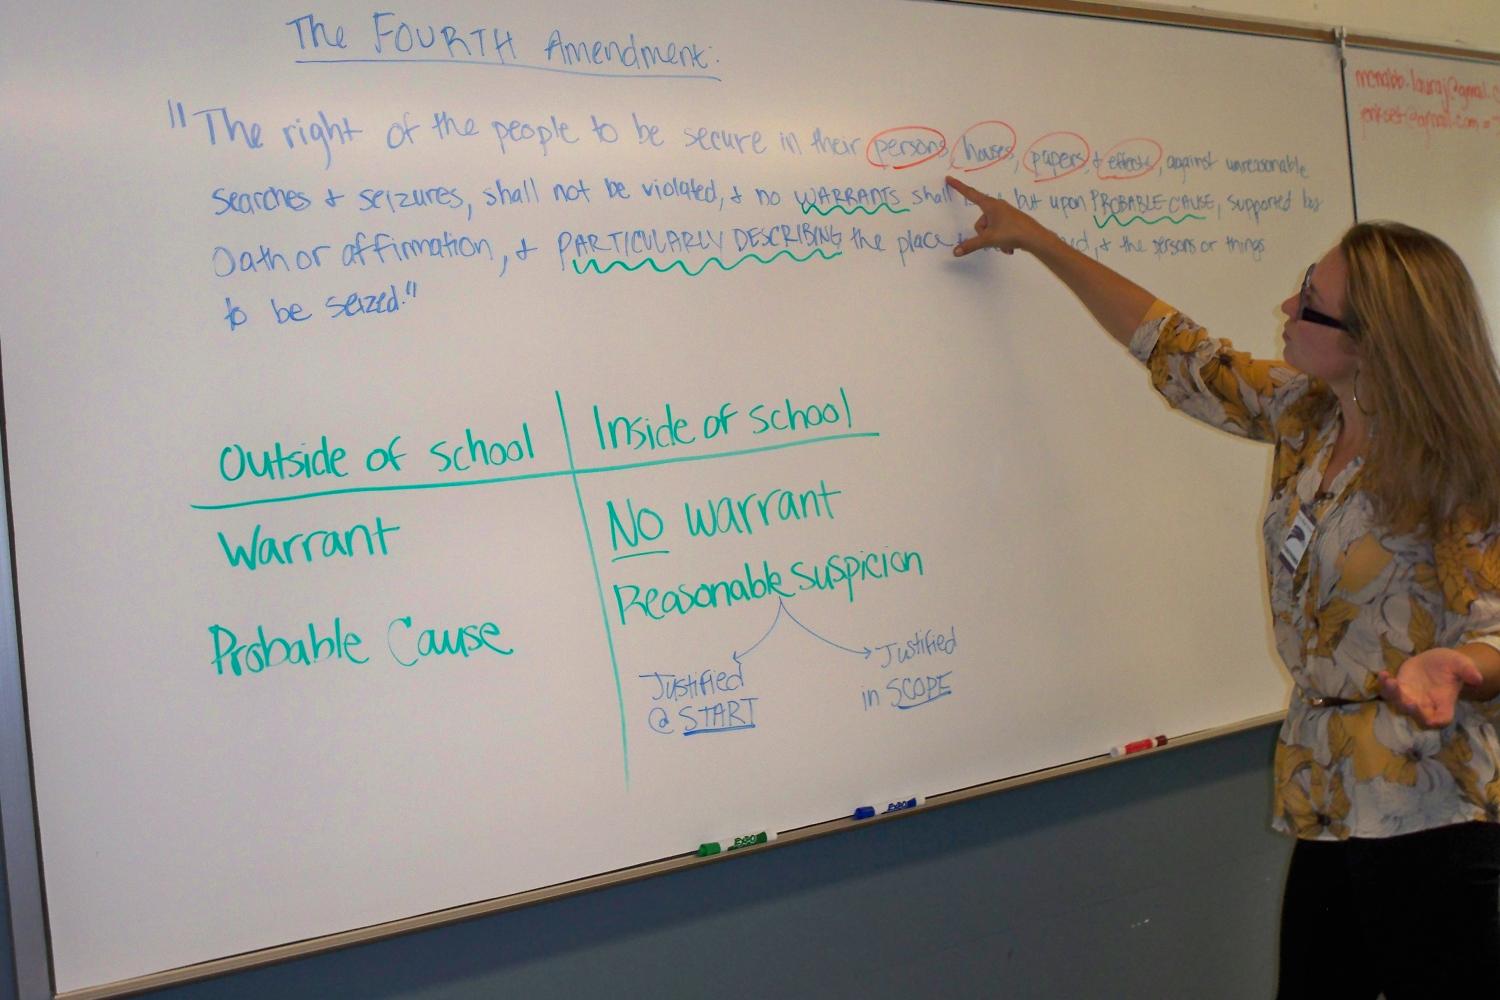 Law student teaching about the Constitution